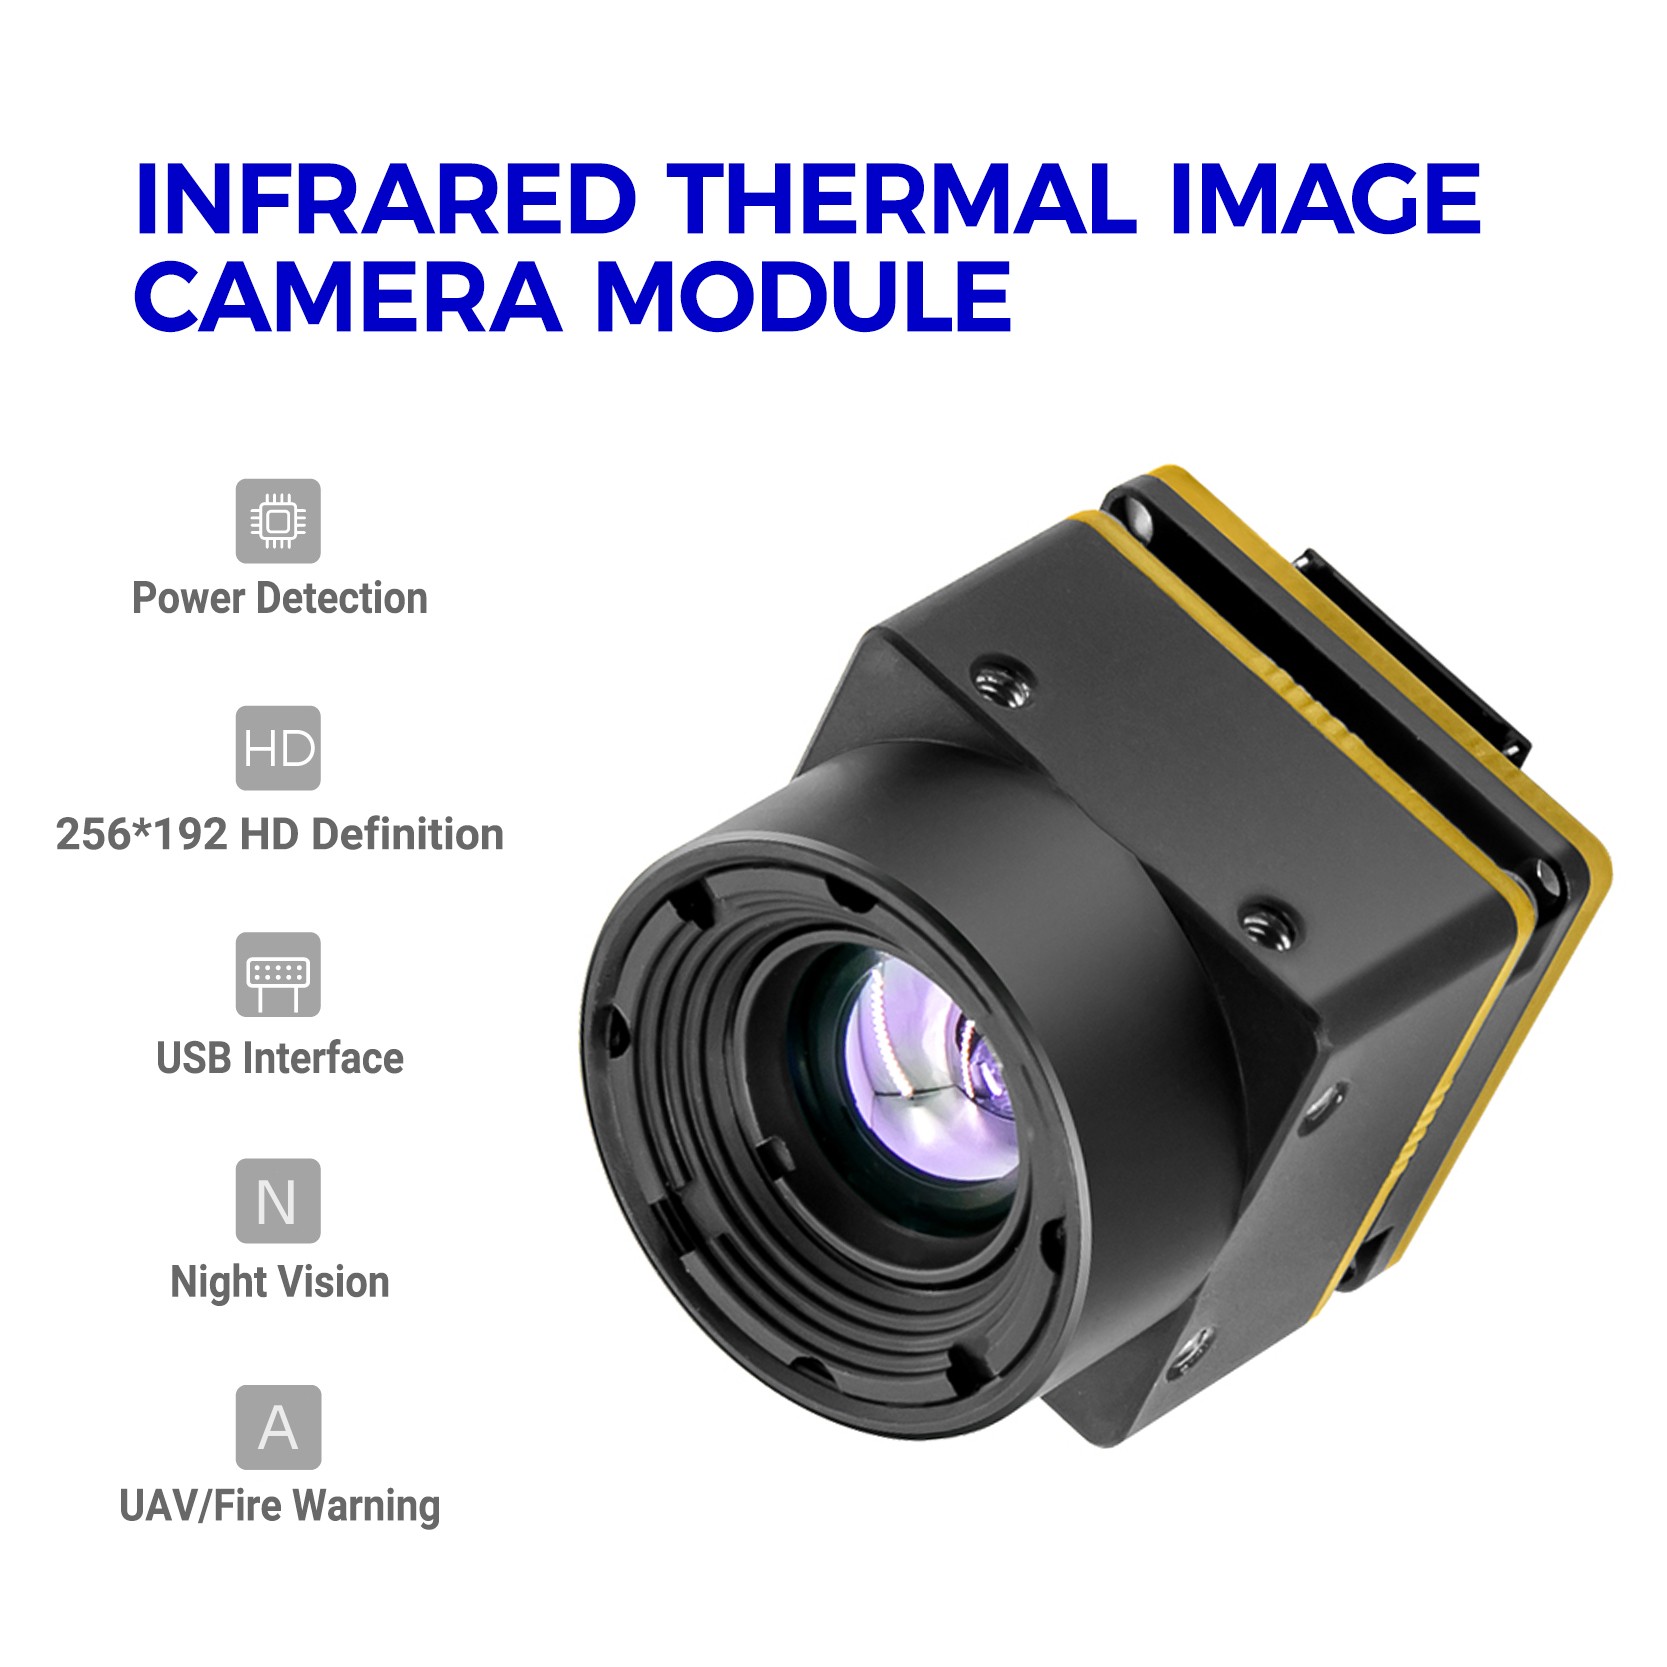 UnCooled LWIR Infrared sensor (8 to 14 microns)